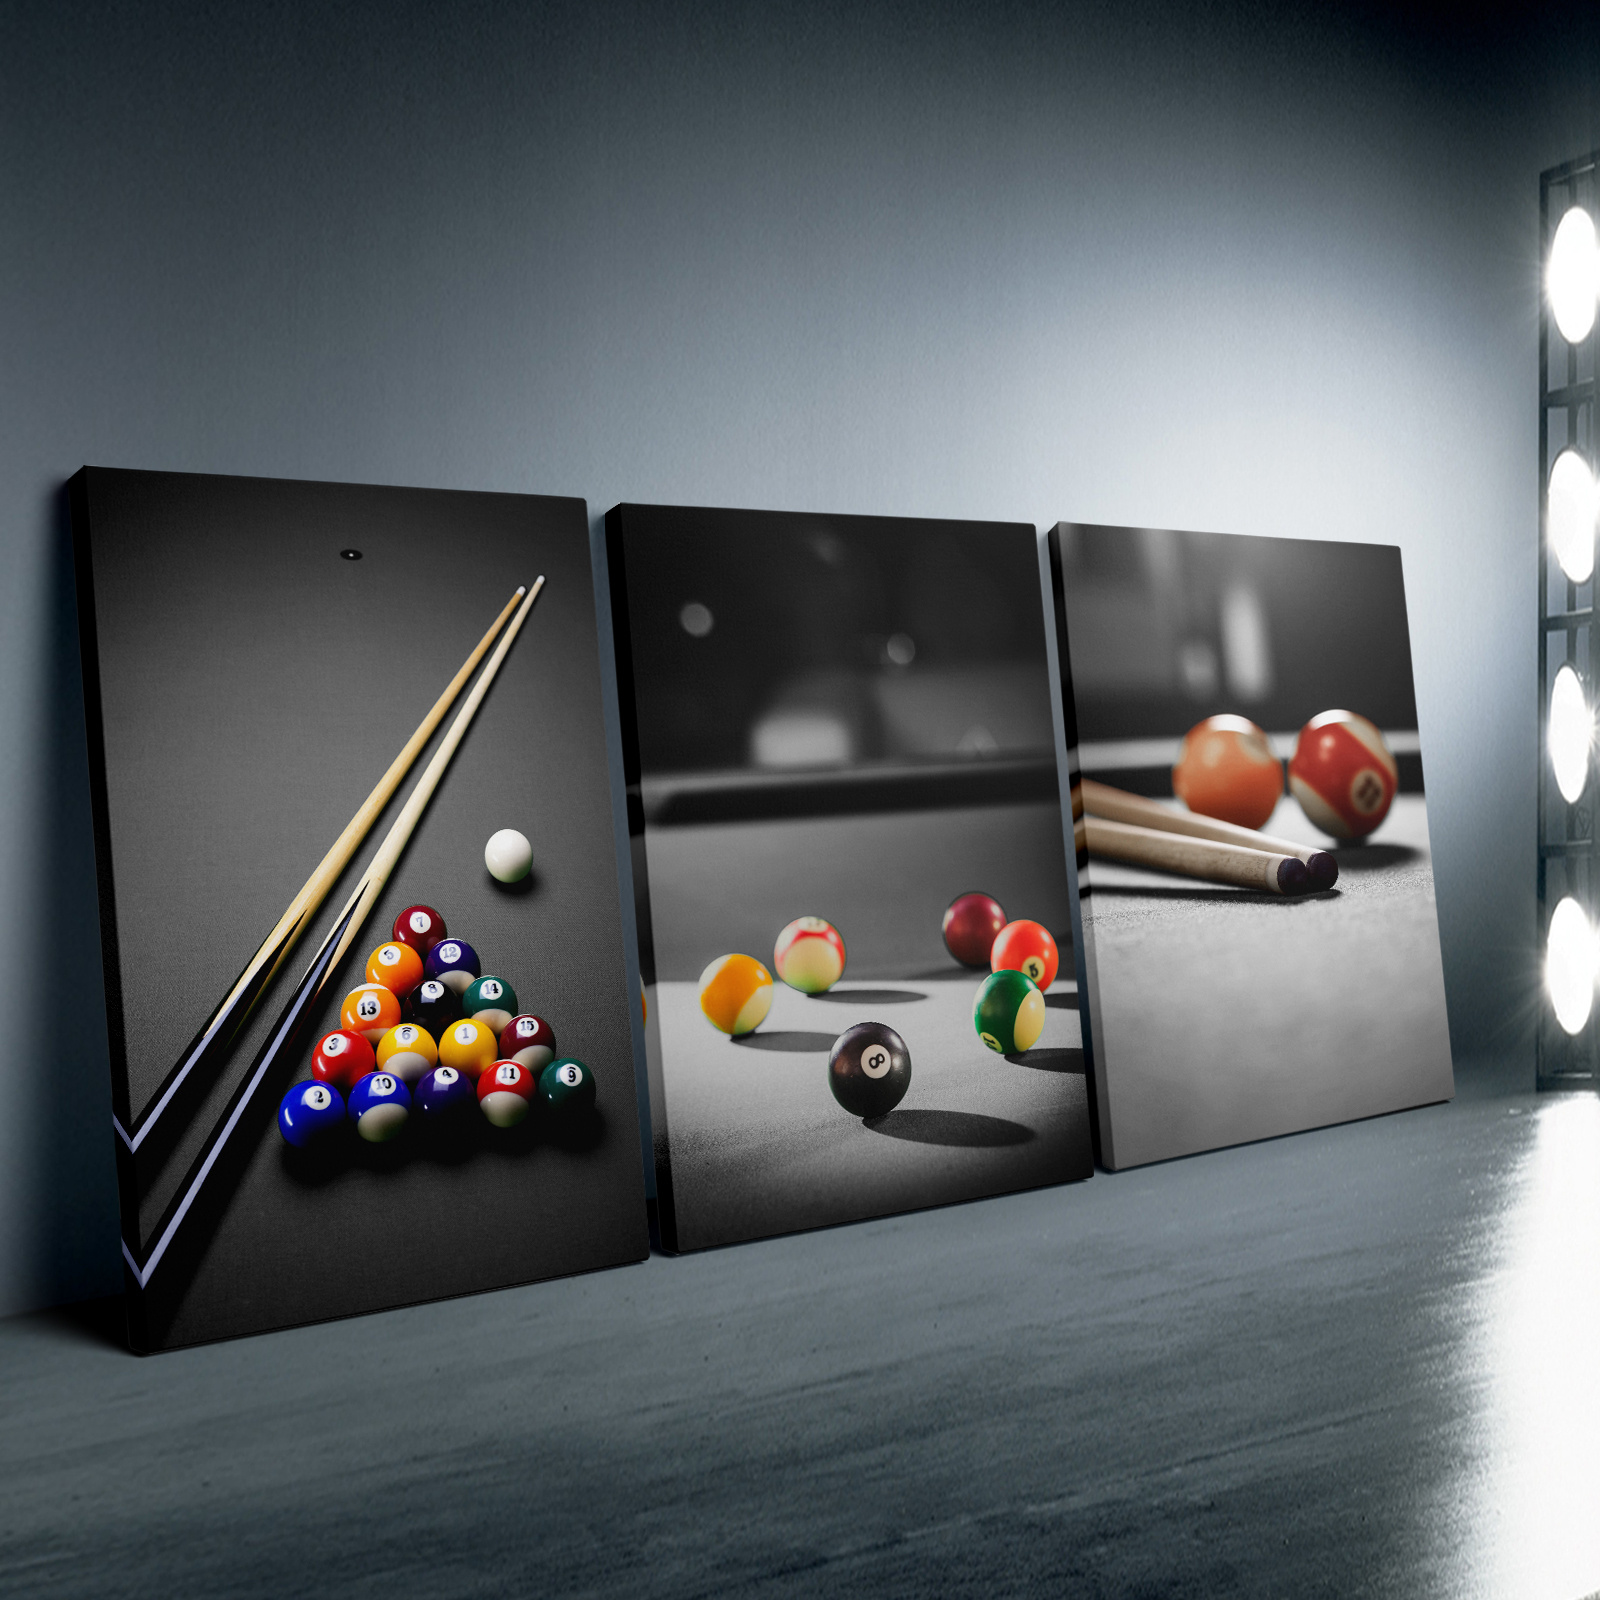 

3pcs Framed Canvas Poster, Billiards Sports Painting, Canvas Wall Art, Artwork Wall Painting For Gift, Bedroom, Office, Living Room, Cafe, Bar, Wall Decor, Home And Dormitory Decoration